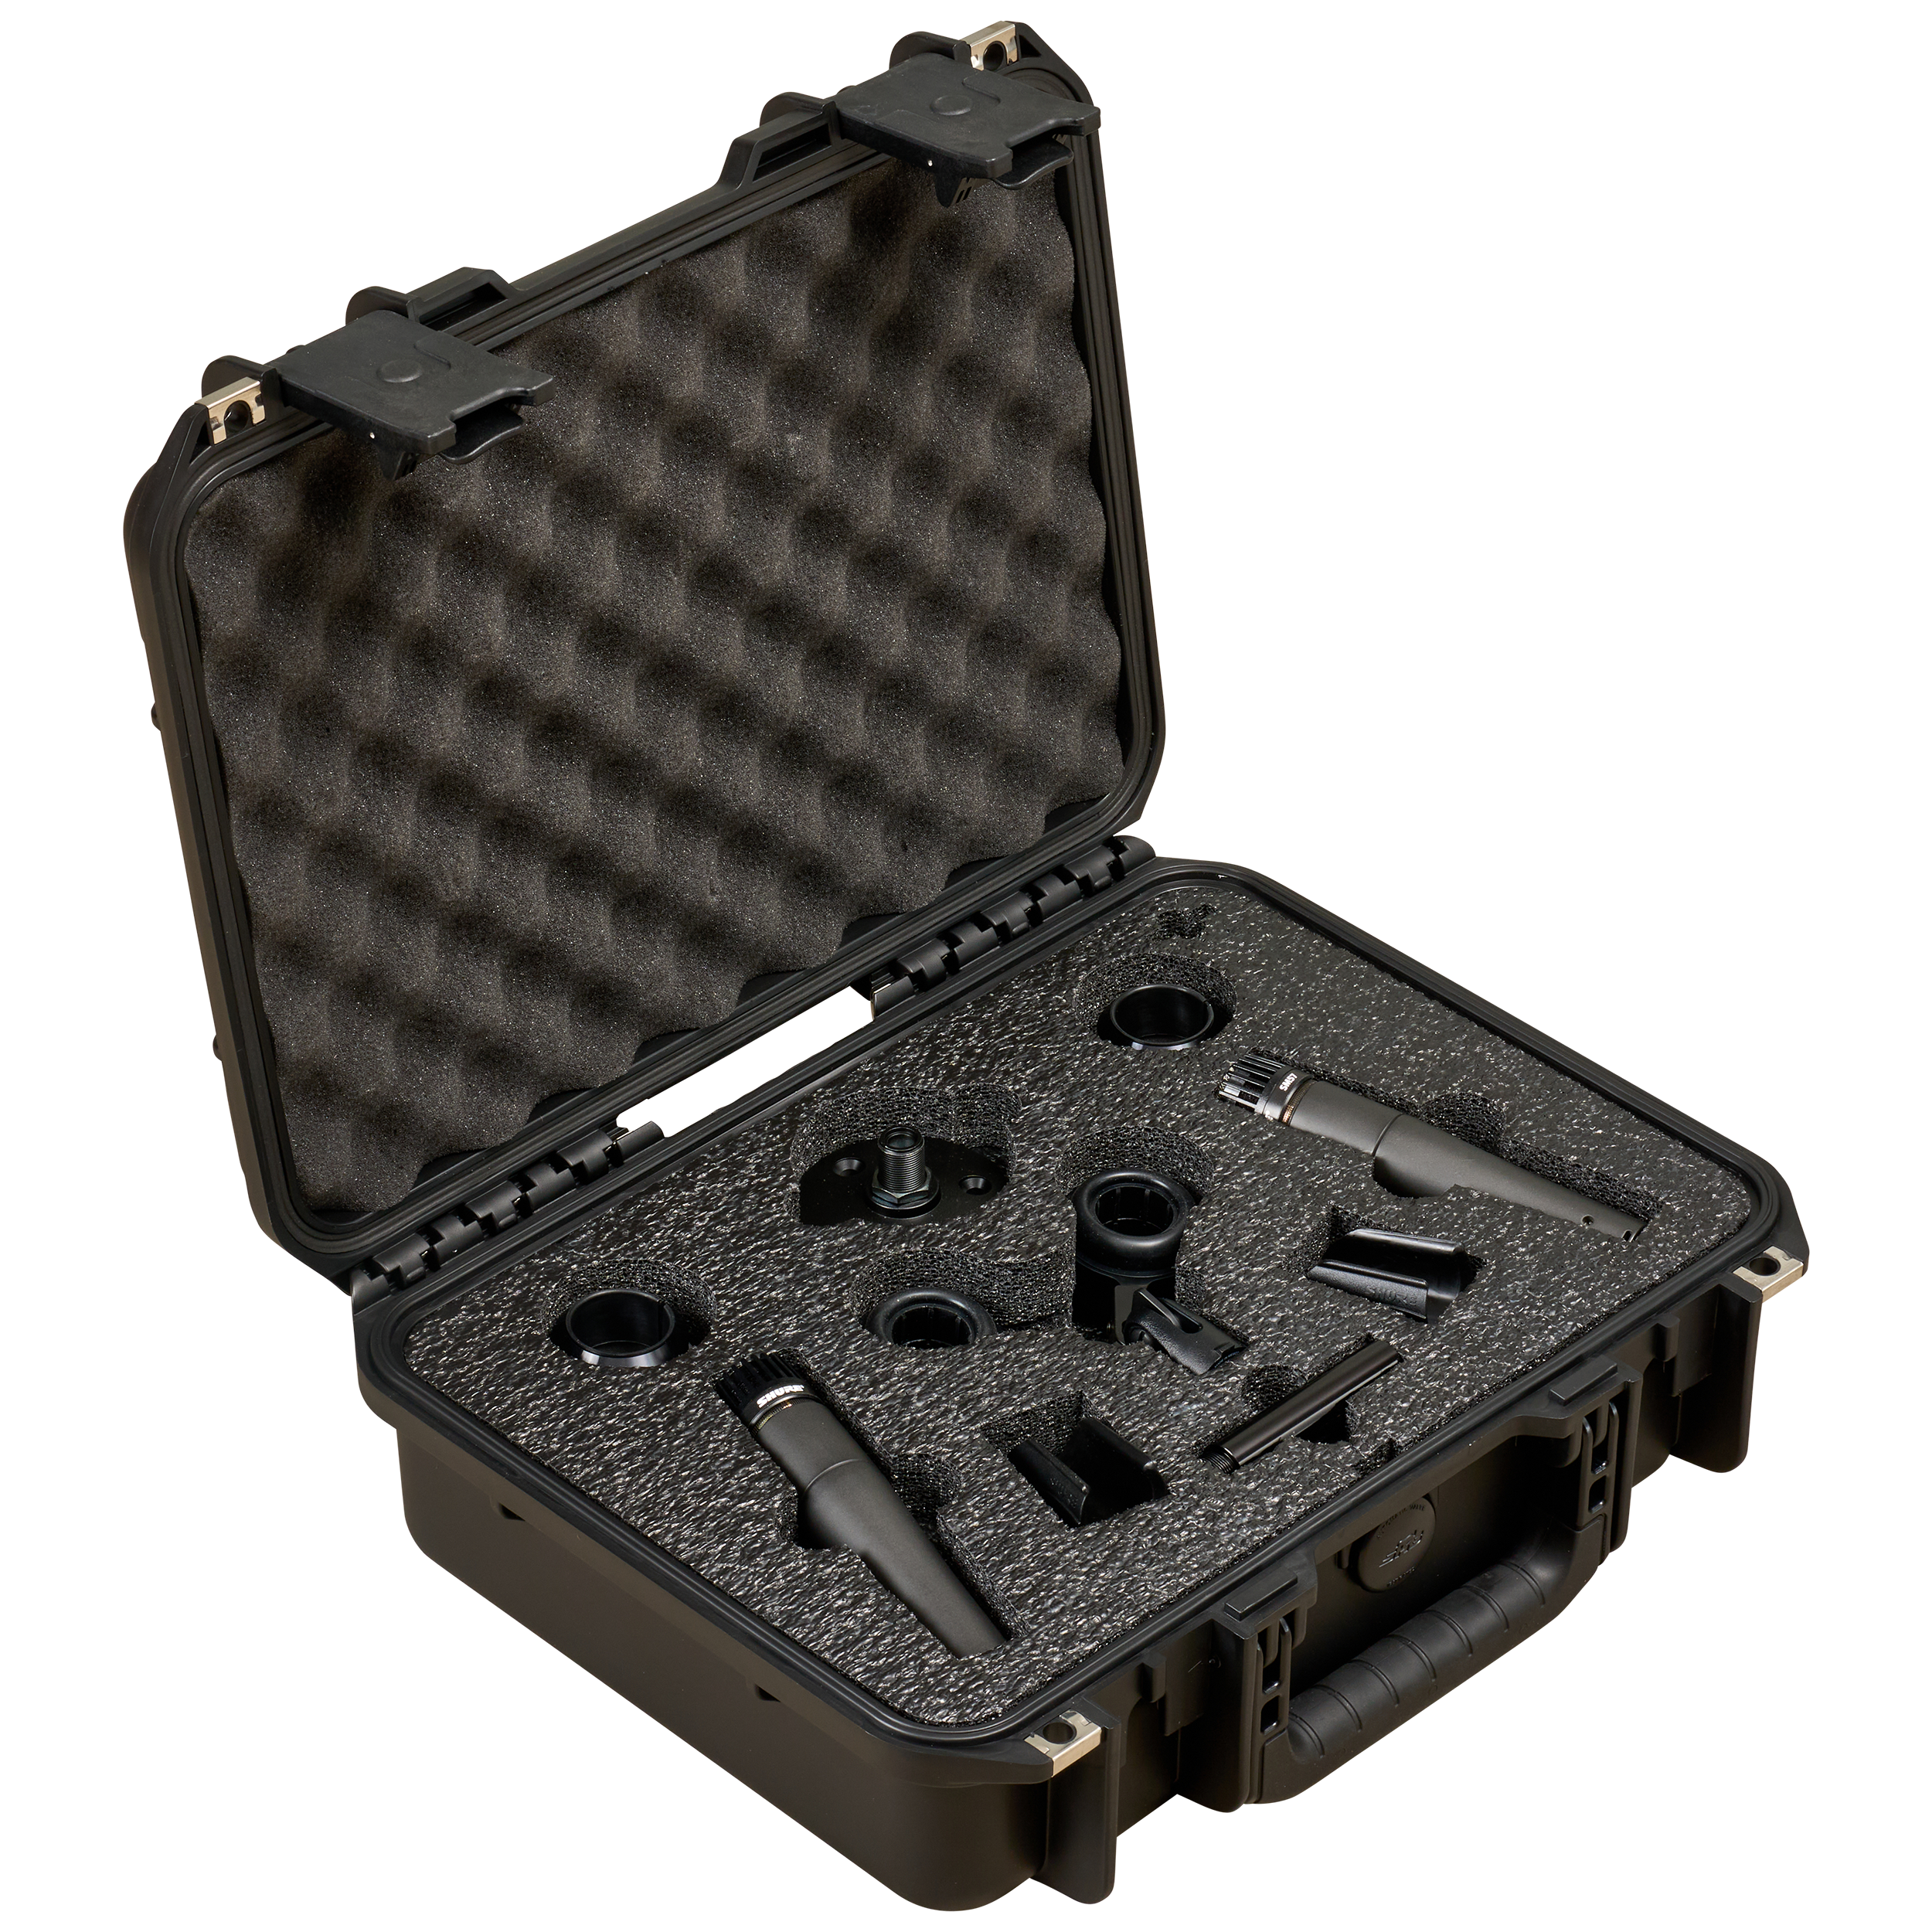 BYFP ipCase for Shure Presidential SM57 Dual Microphone Kit